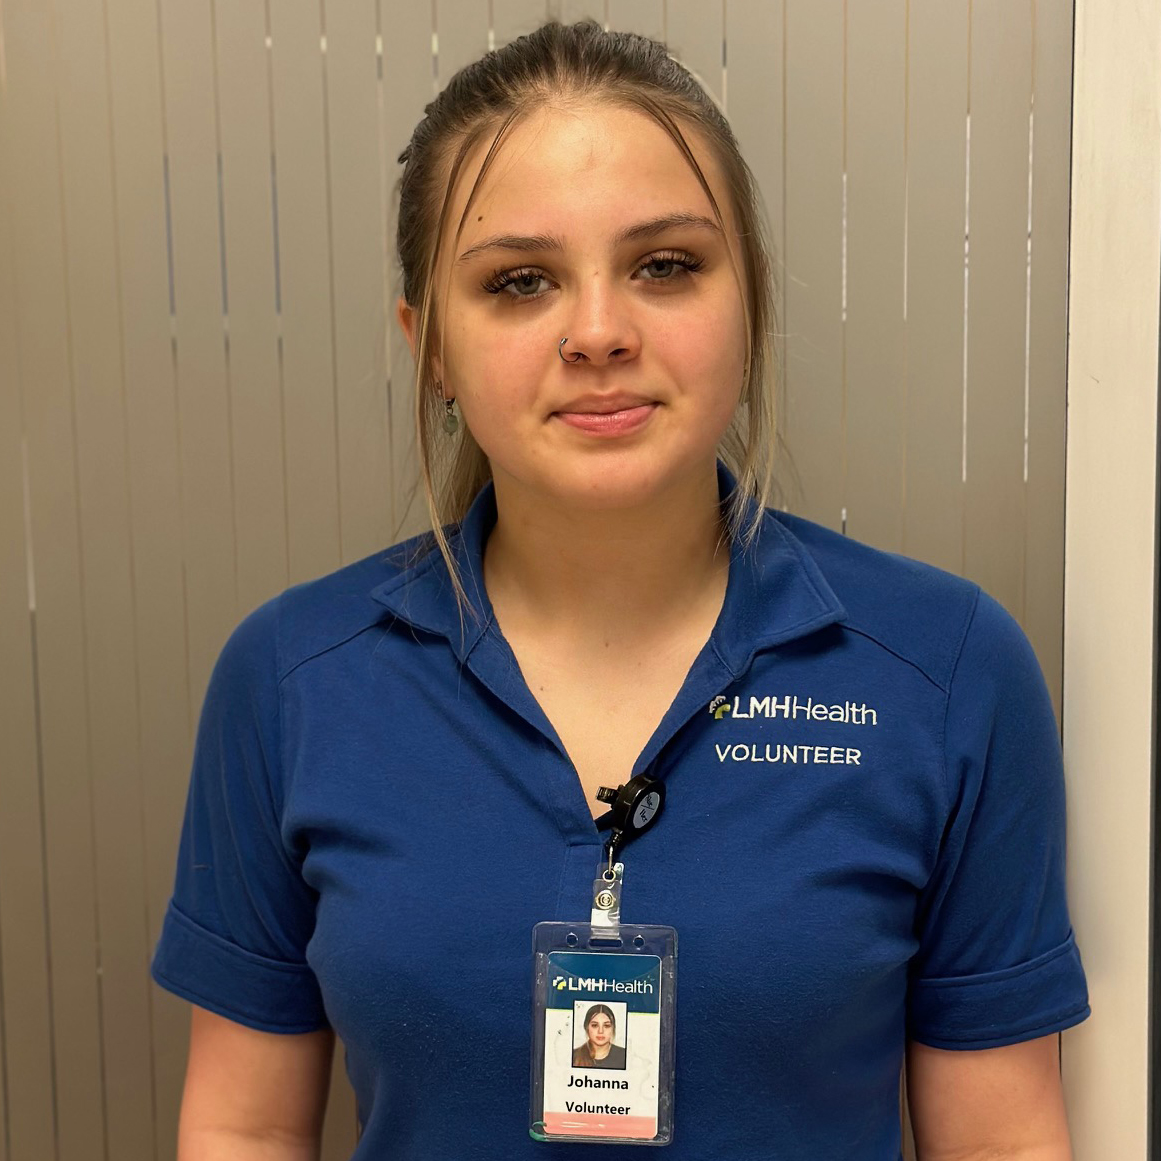 When you enter the doors of the Main Campus at LMH Health, one of the first faces you’ll often see is that of a volunteer. Learn more about how our volunteers are making an impact, at bit.ly/3TIuiYQ